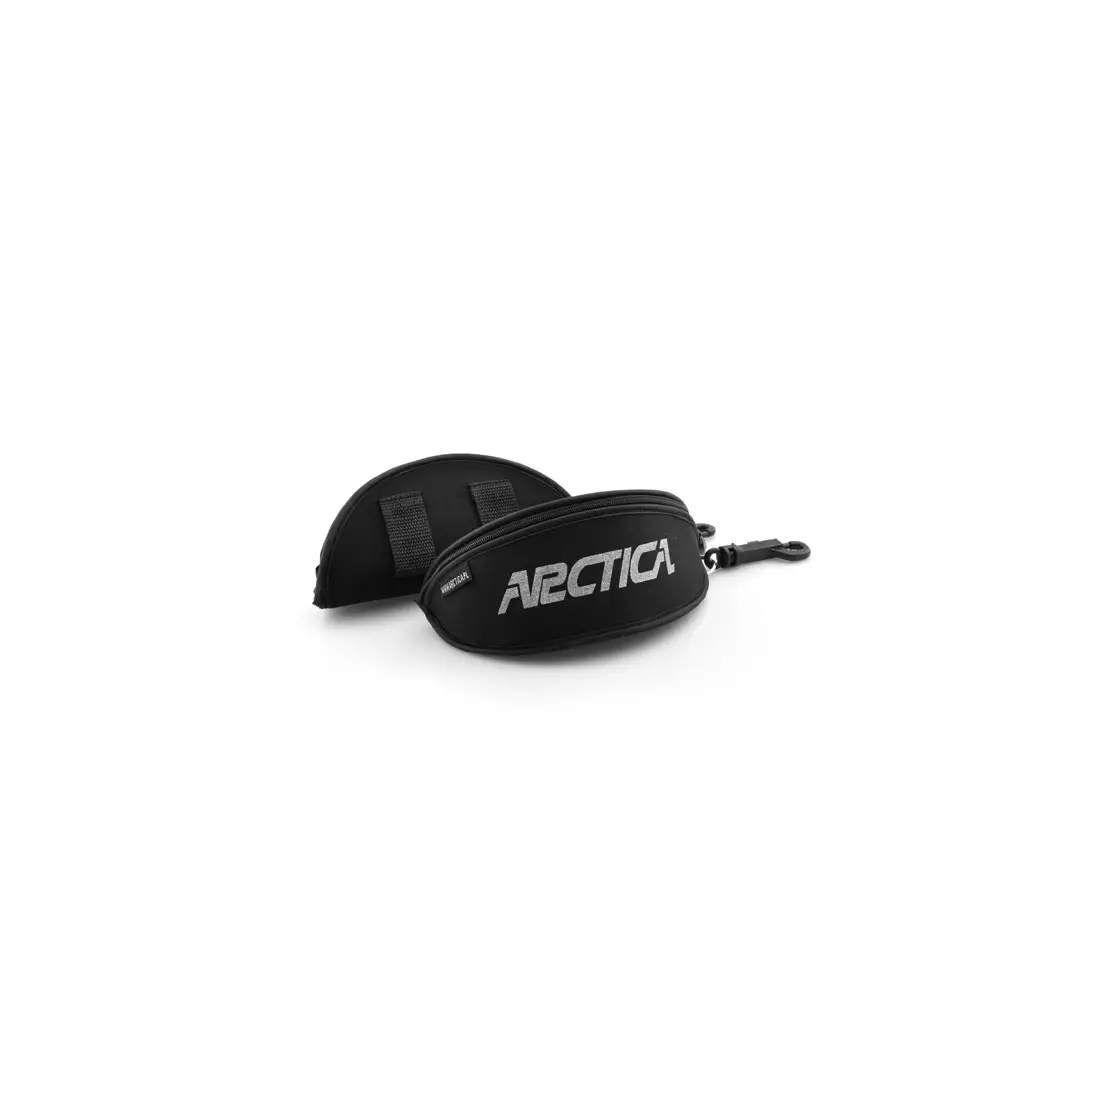 ARCTICA sports glasses S-90A - color: Black and red